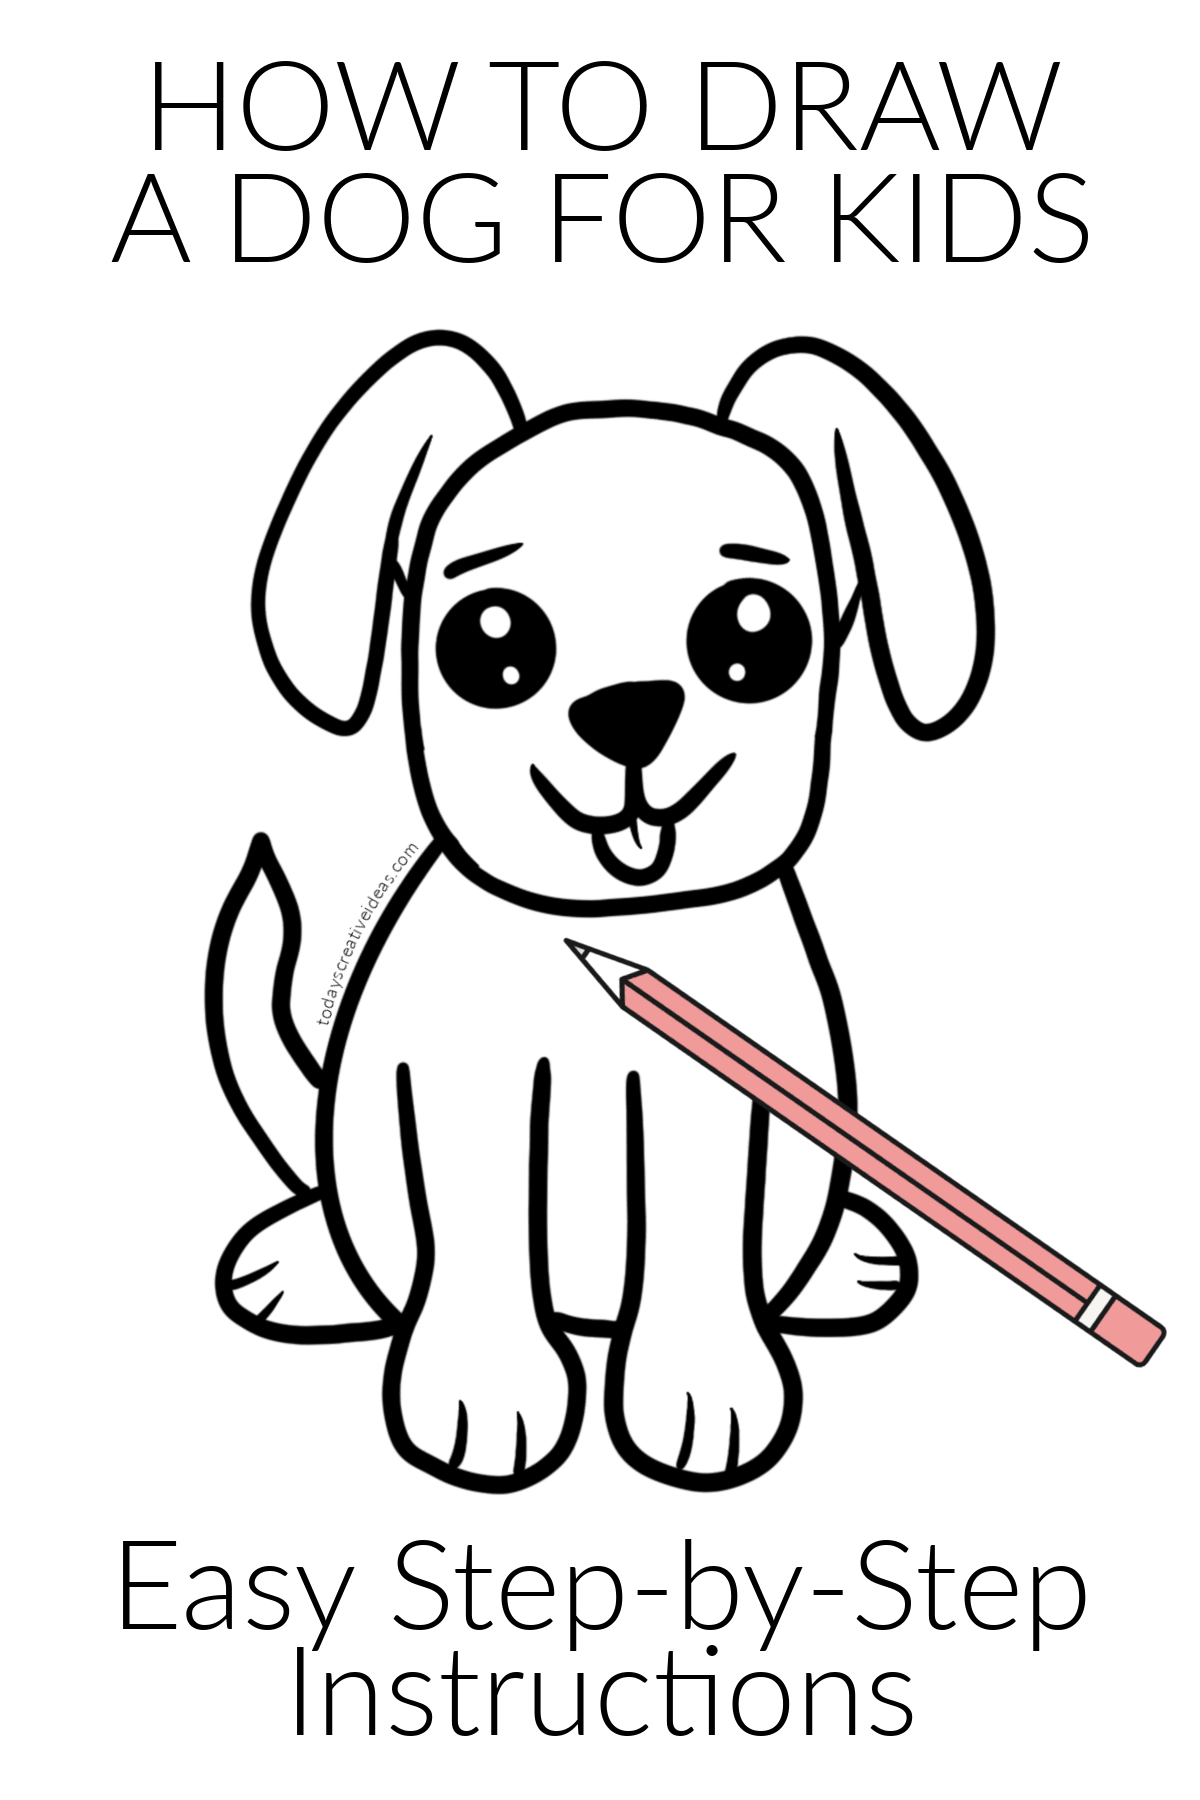 How to Draw a Dog - Easy Step by Step Drawing for Kids and Beginners-saigonsouth.com.vn